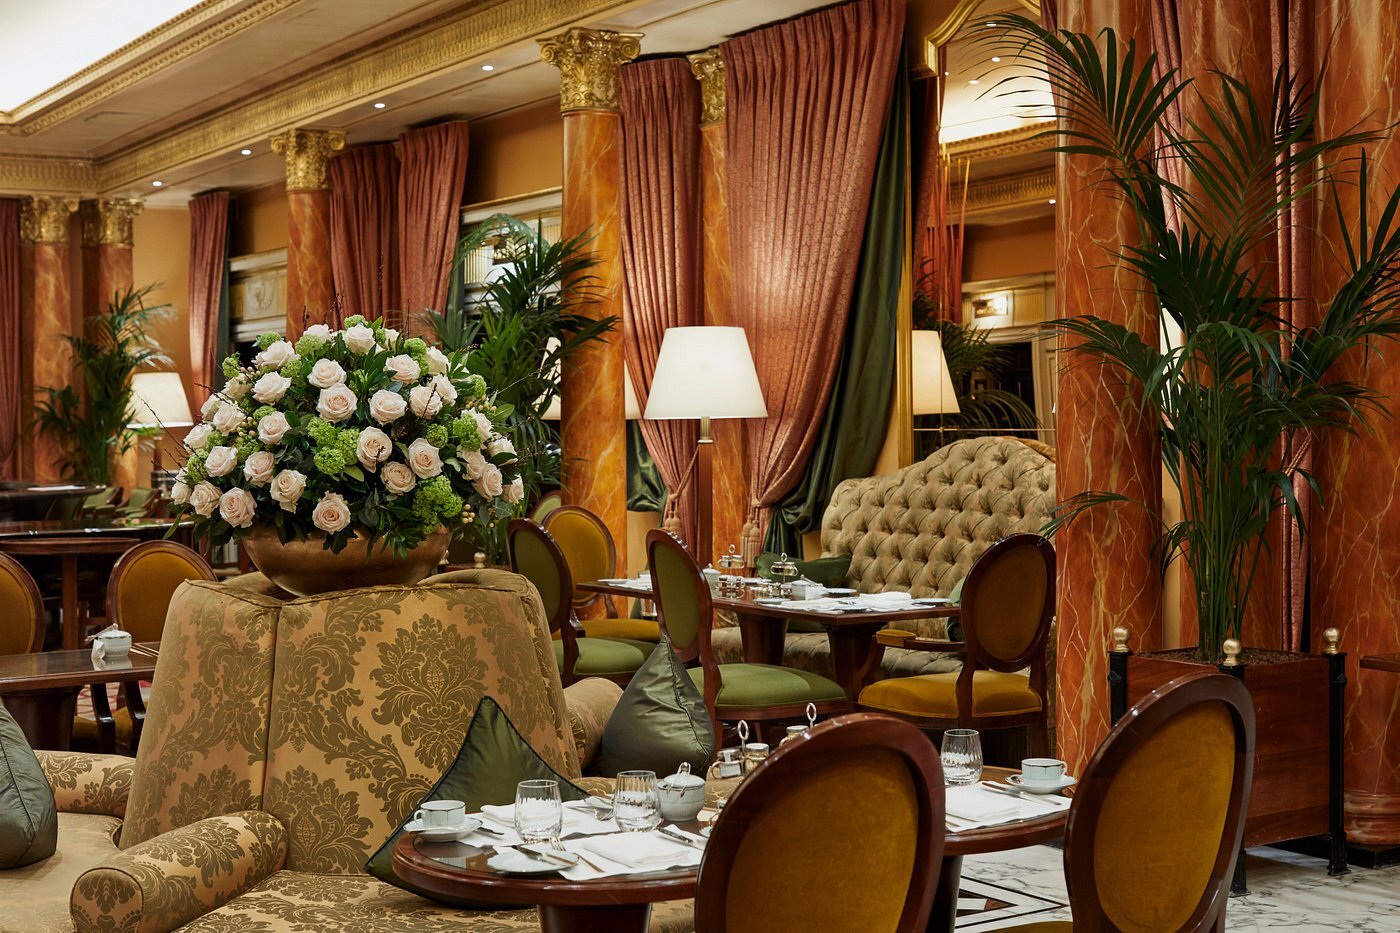 The Dorchester to auction off more than 2,000 items ahead of major renovation